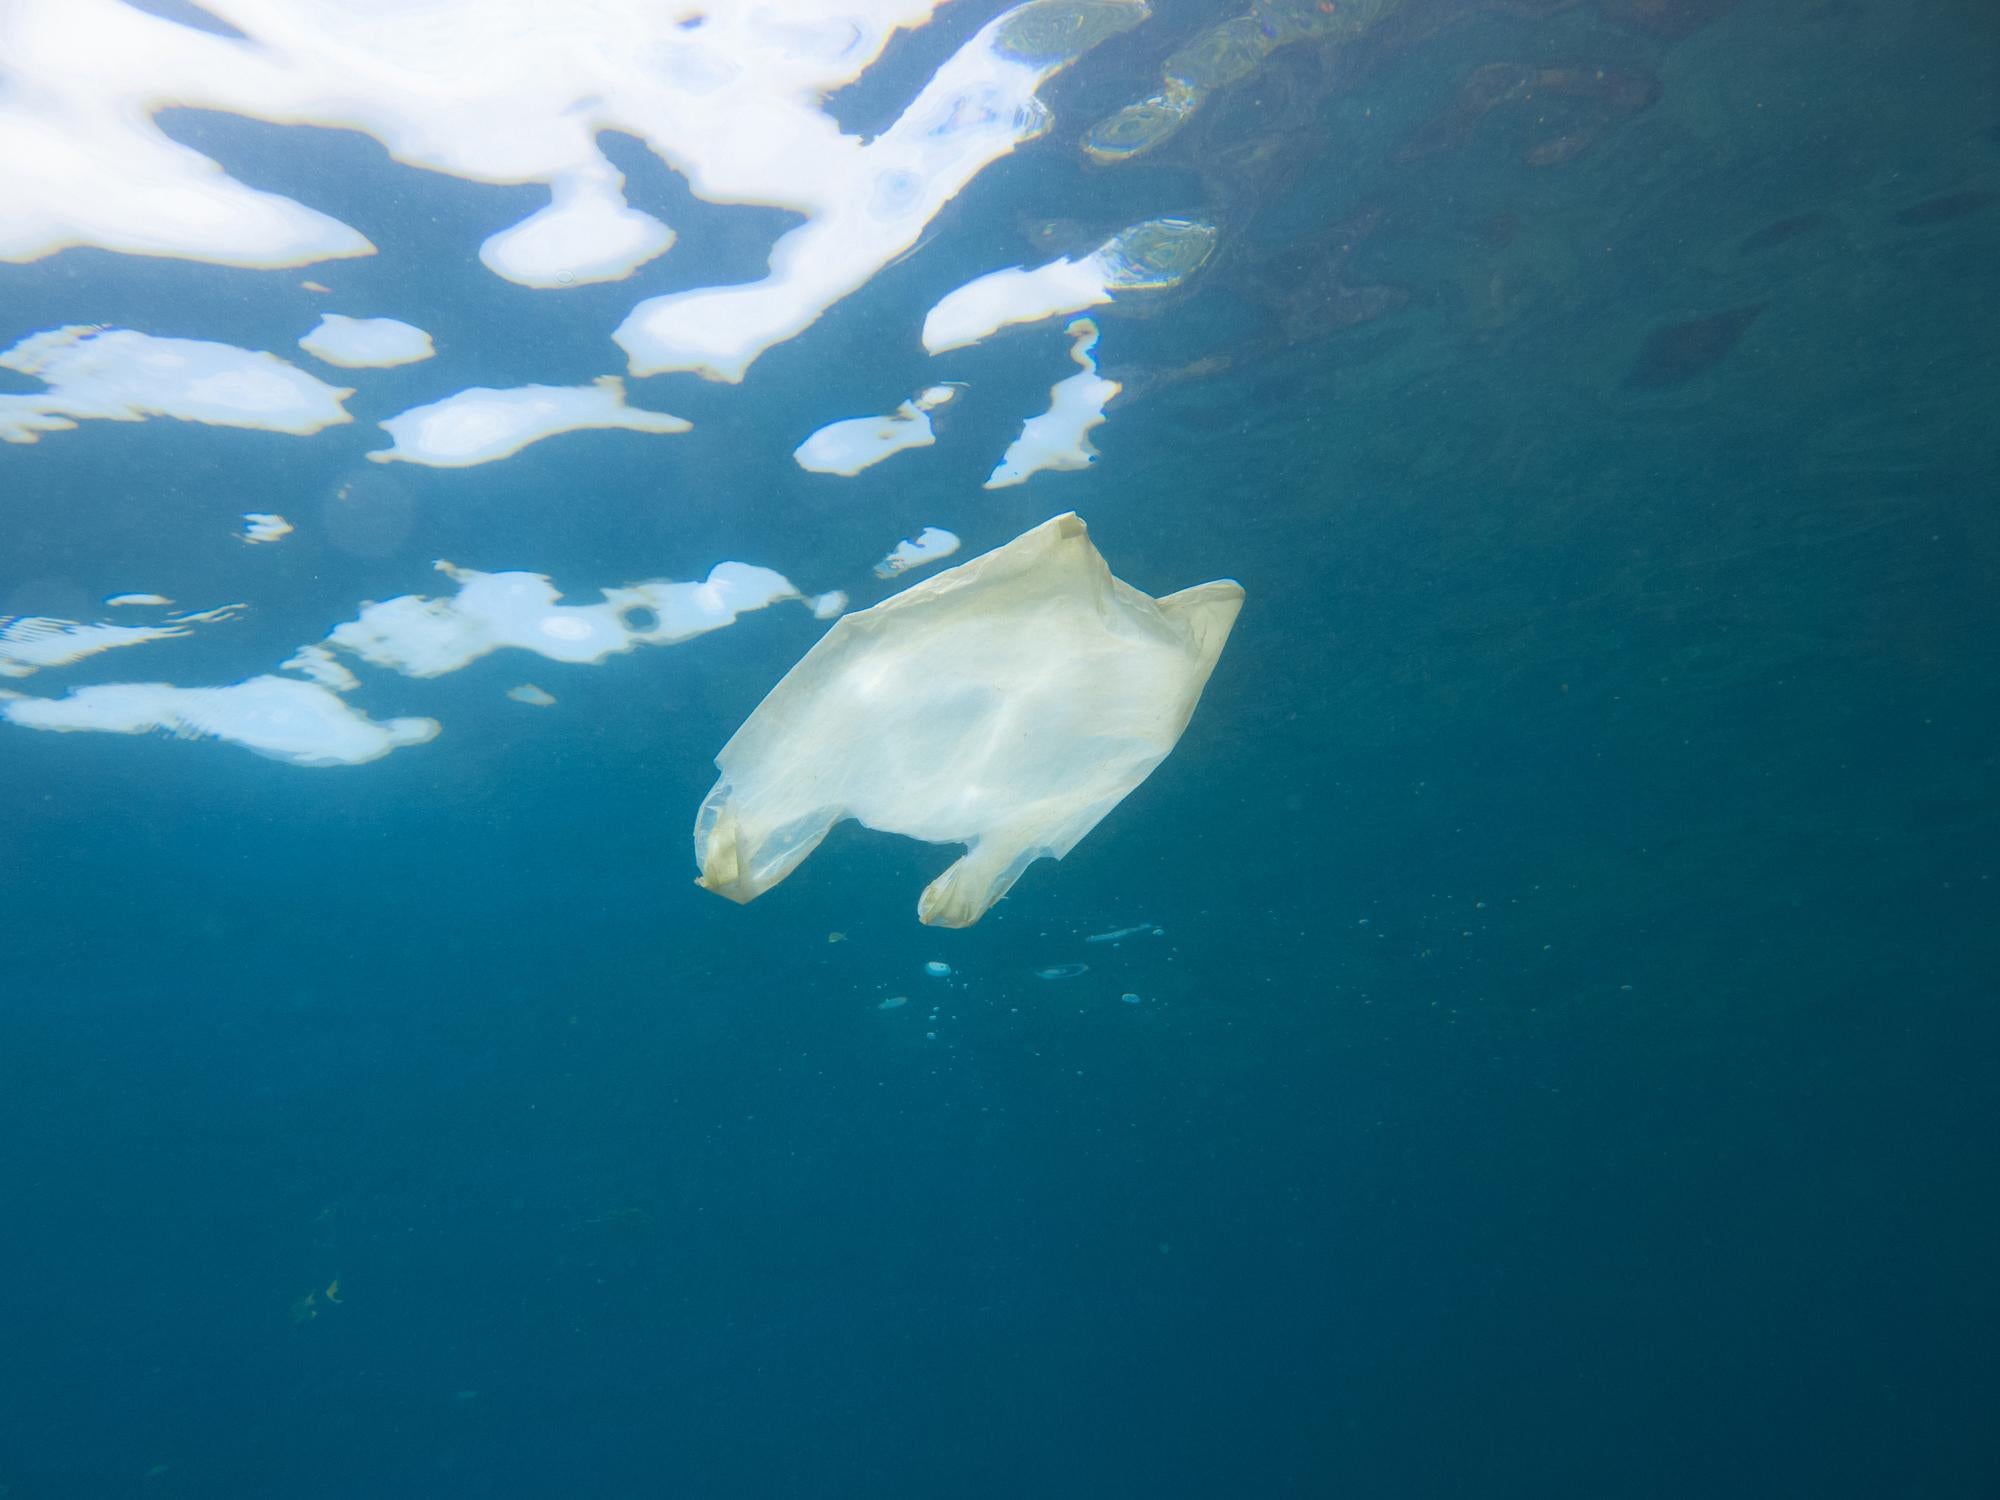 The number of plastic bags on the seabed has fallen in recent years according to a new study by researchers at Cefas